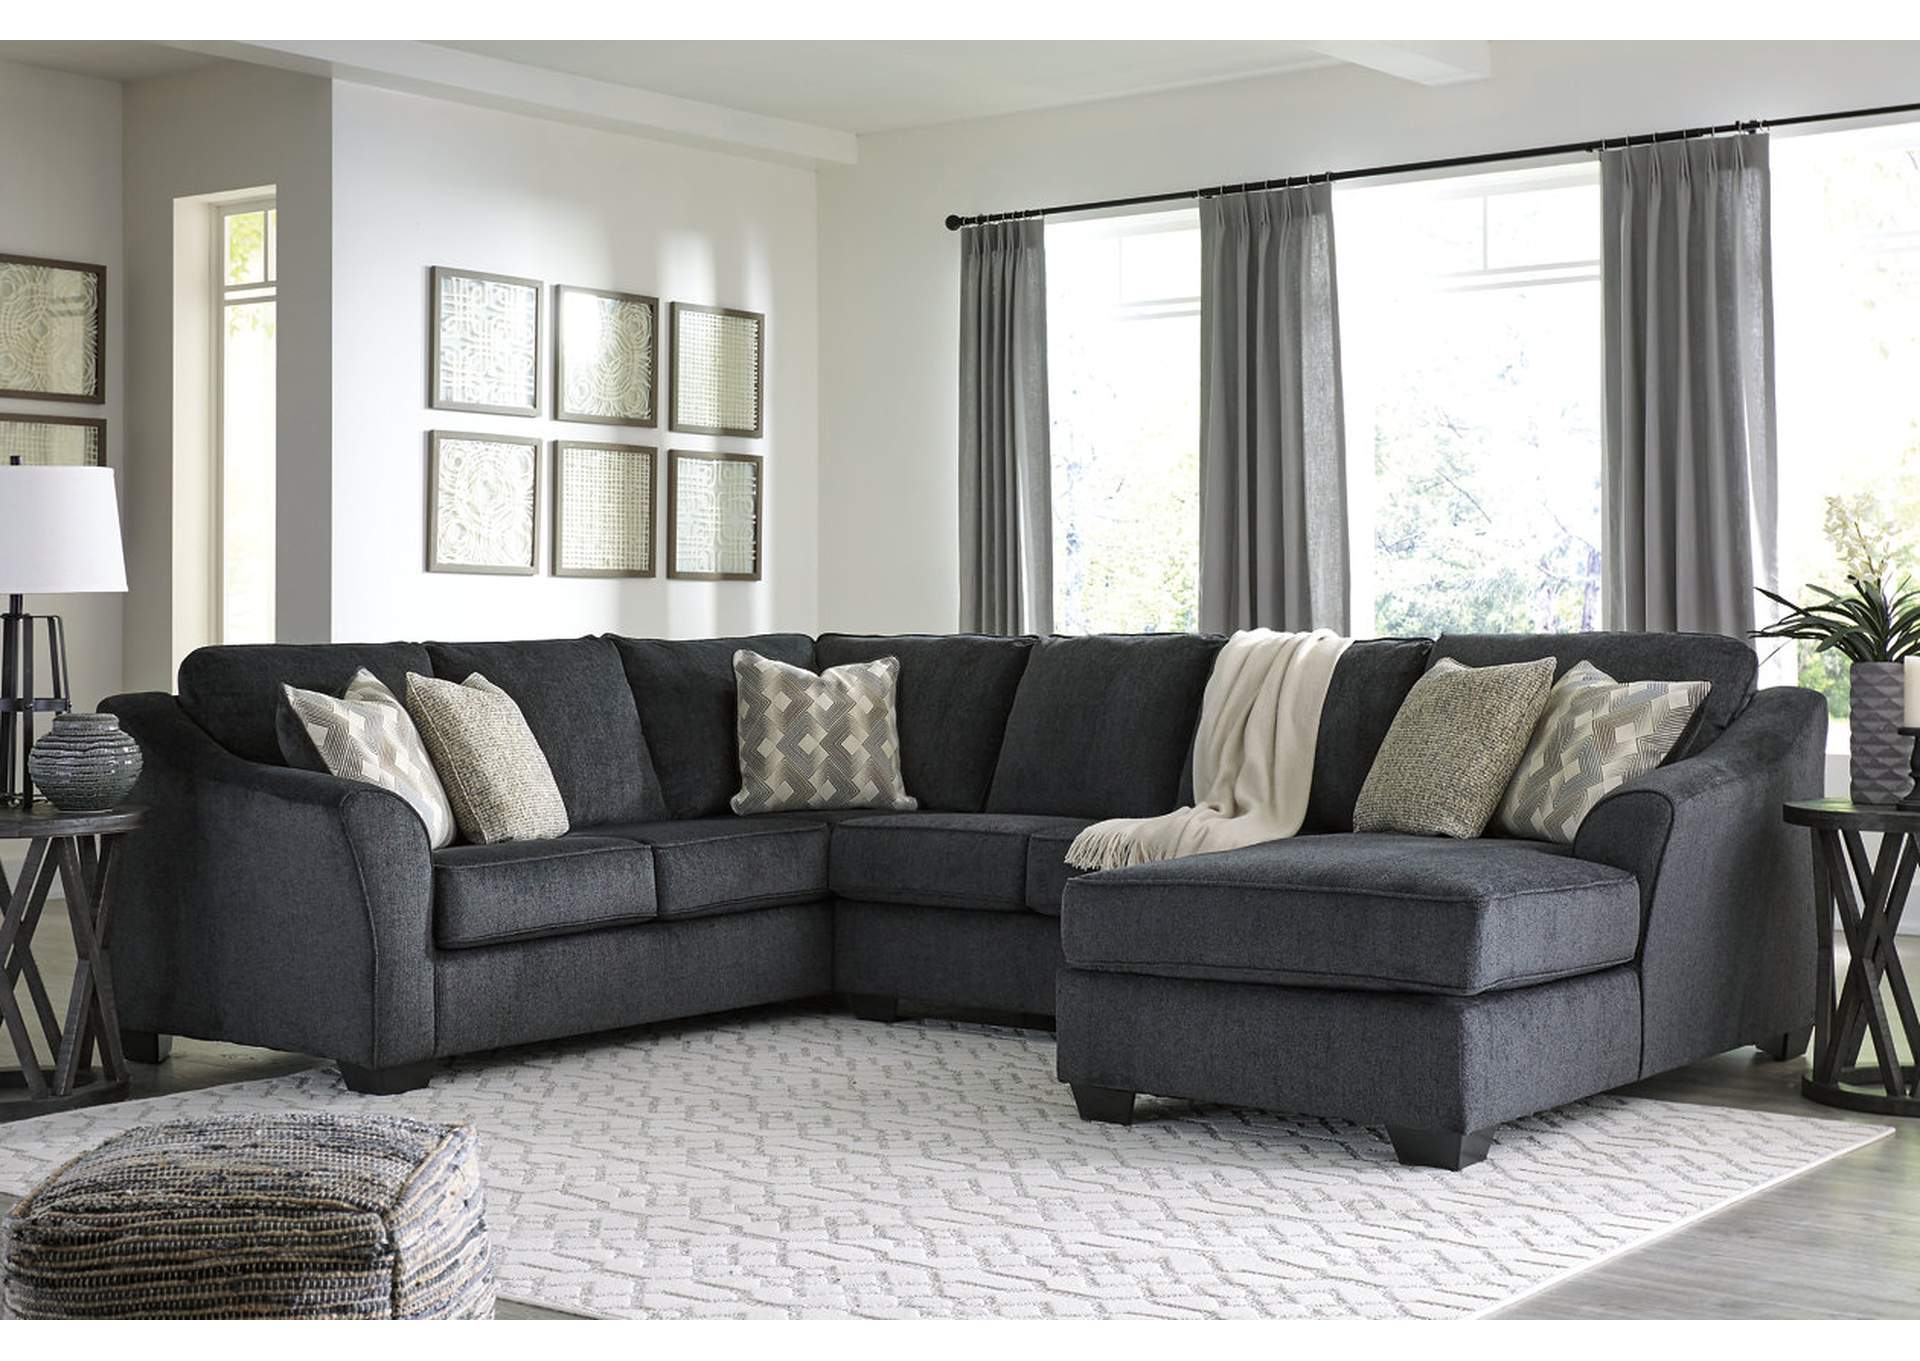 Eltmann 3-Piece Sectional with Chaise,Signature Design By Ashley